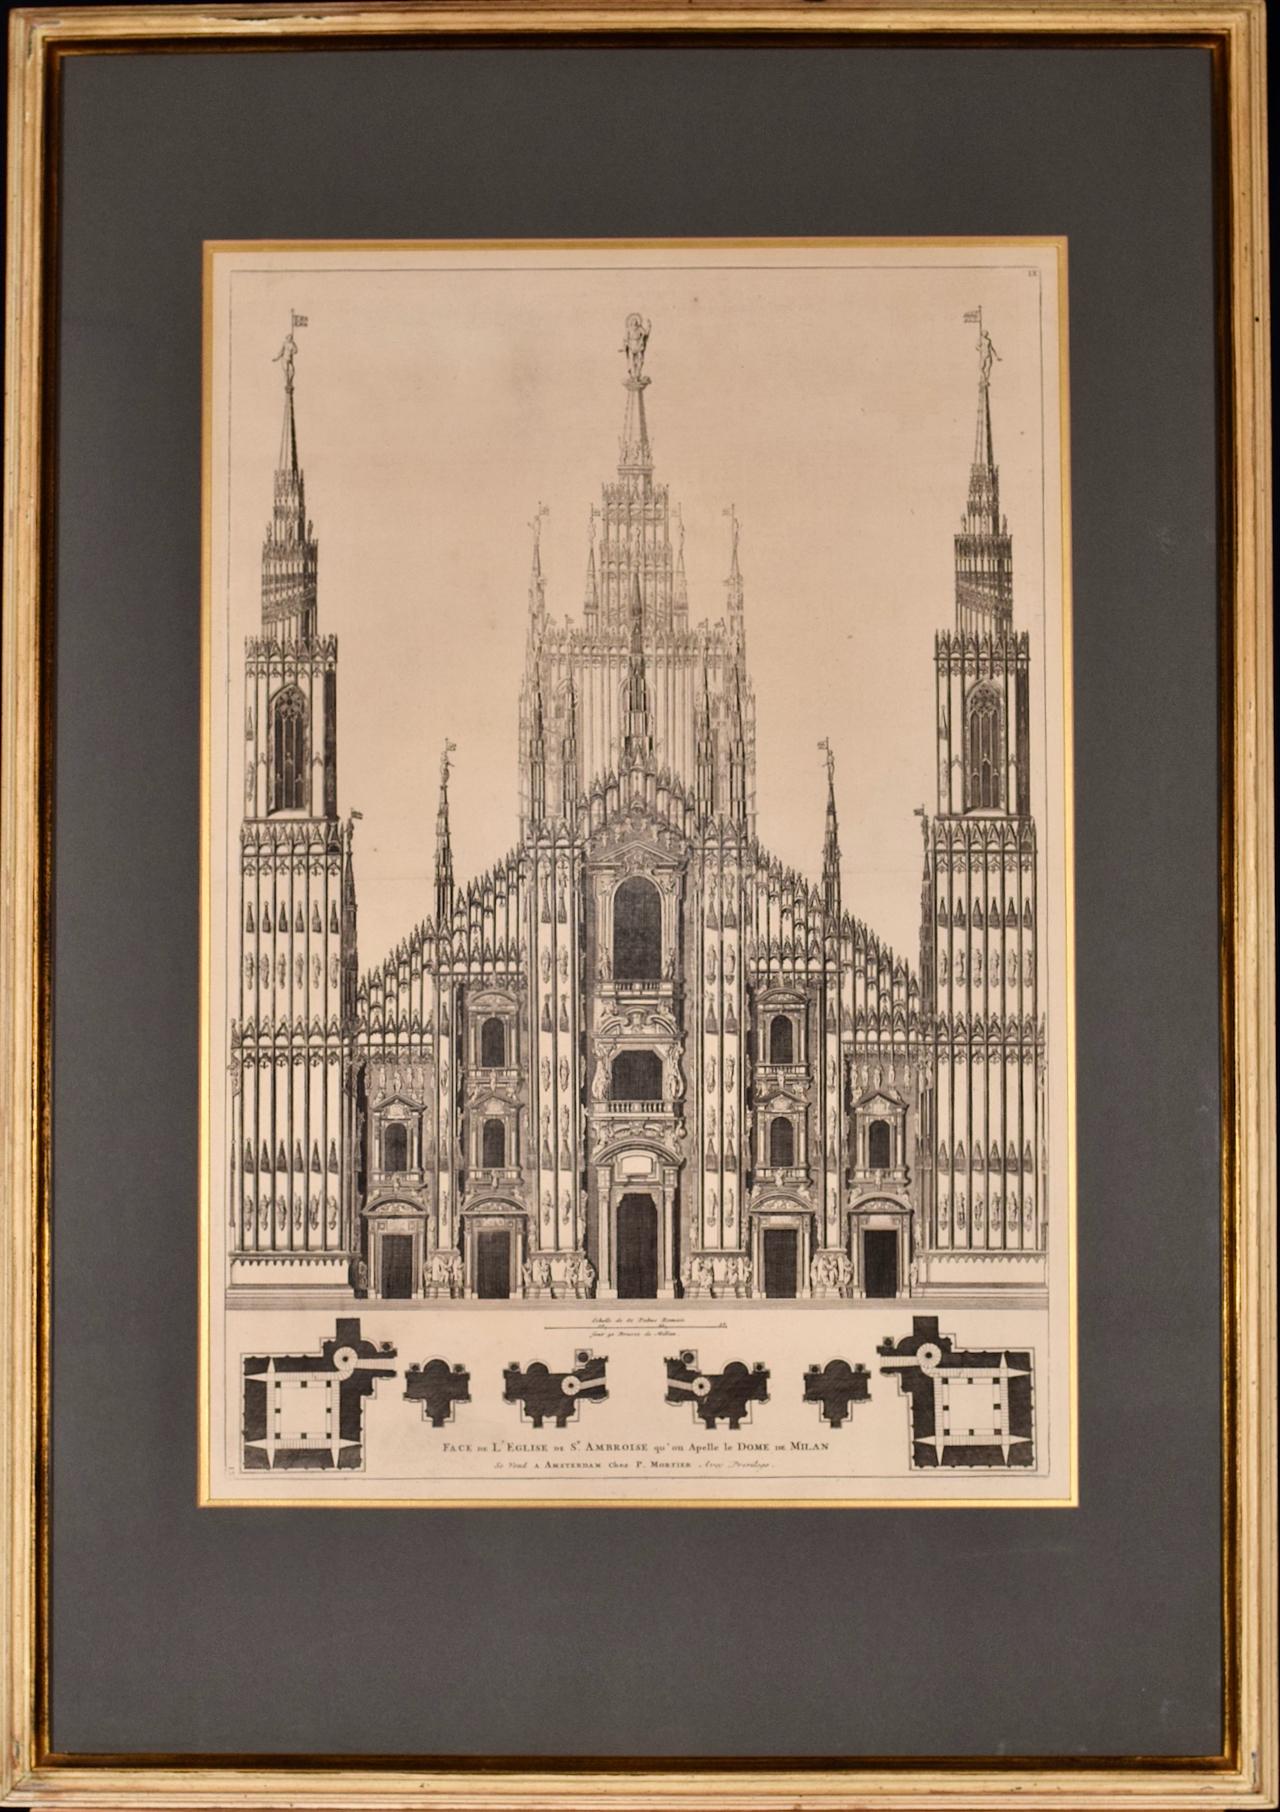 Pierre Mortier Still-Life Print - Milan Cathedral: A Framed 1704 Architectural Rendering by Mortier after Blaeu